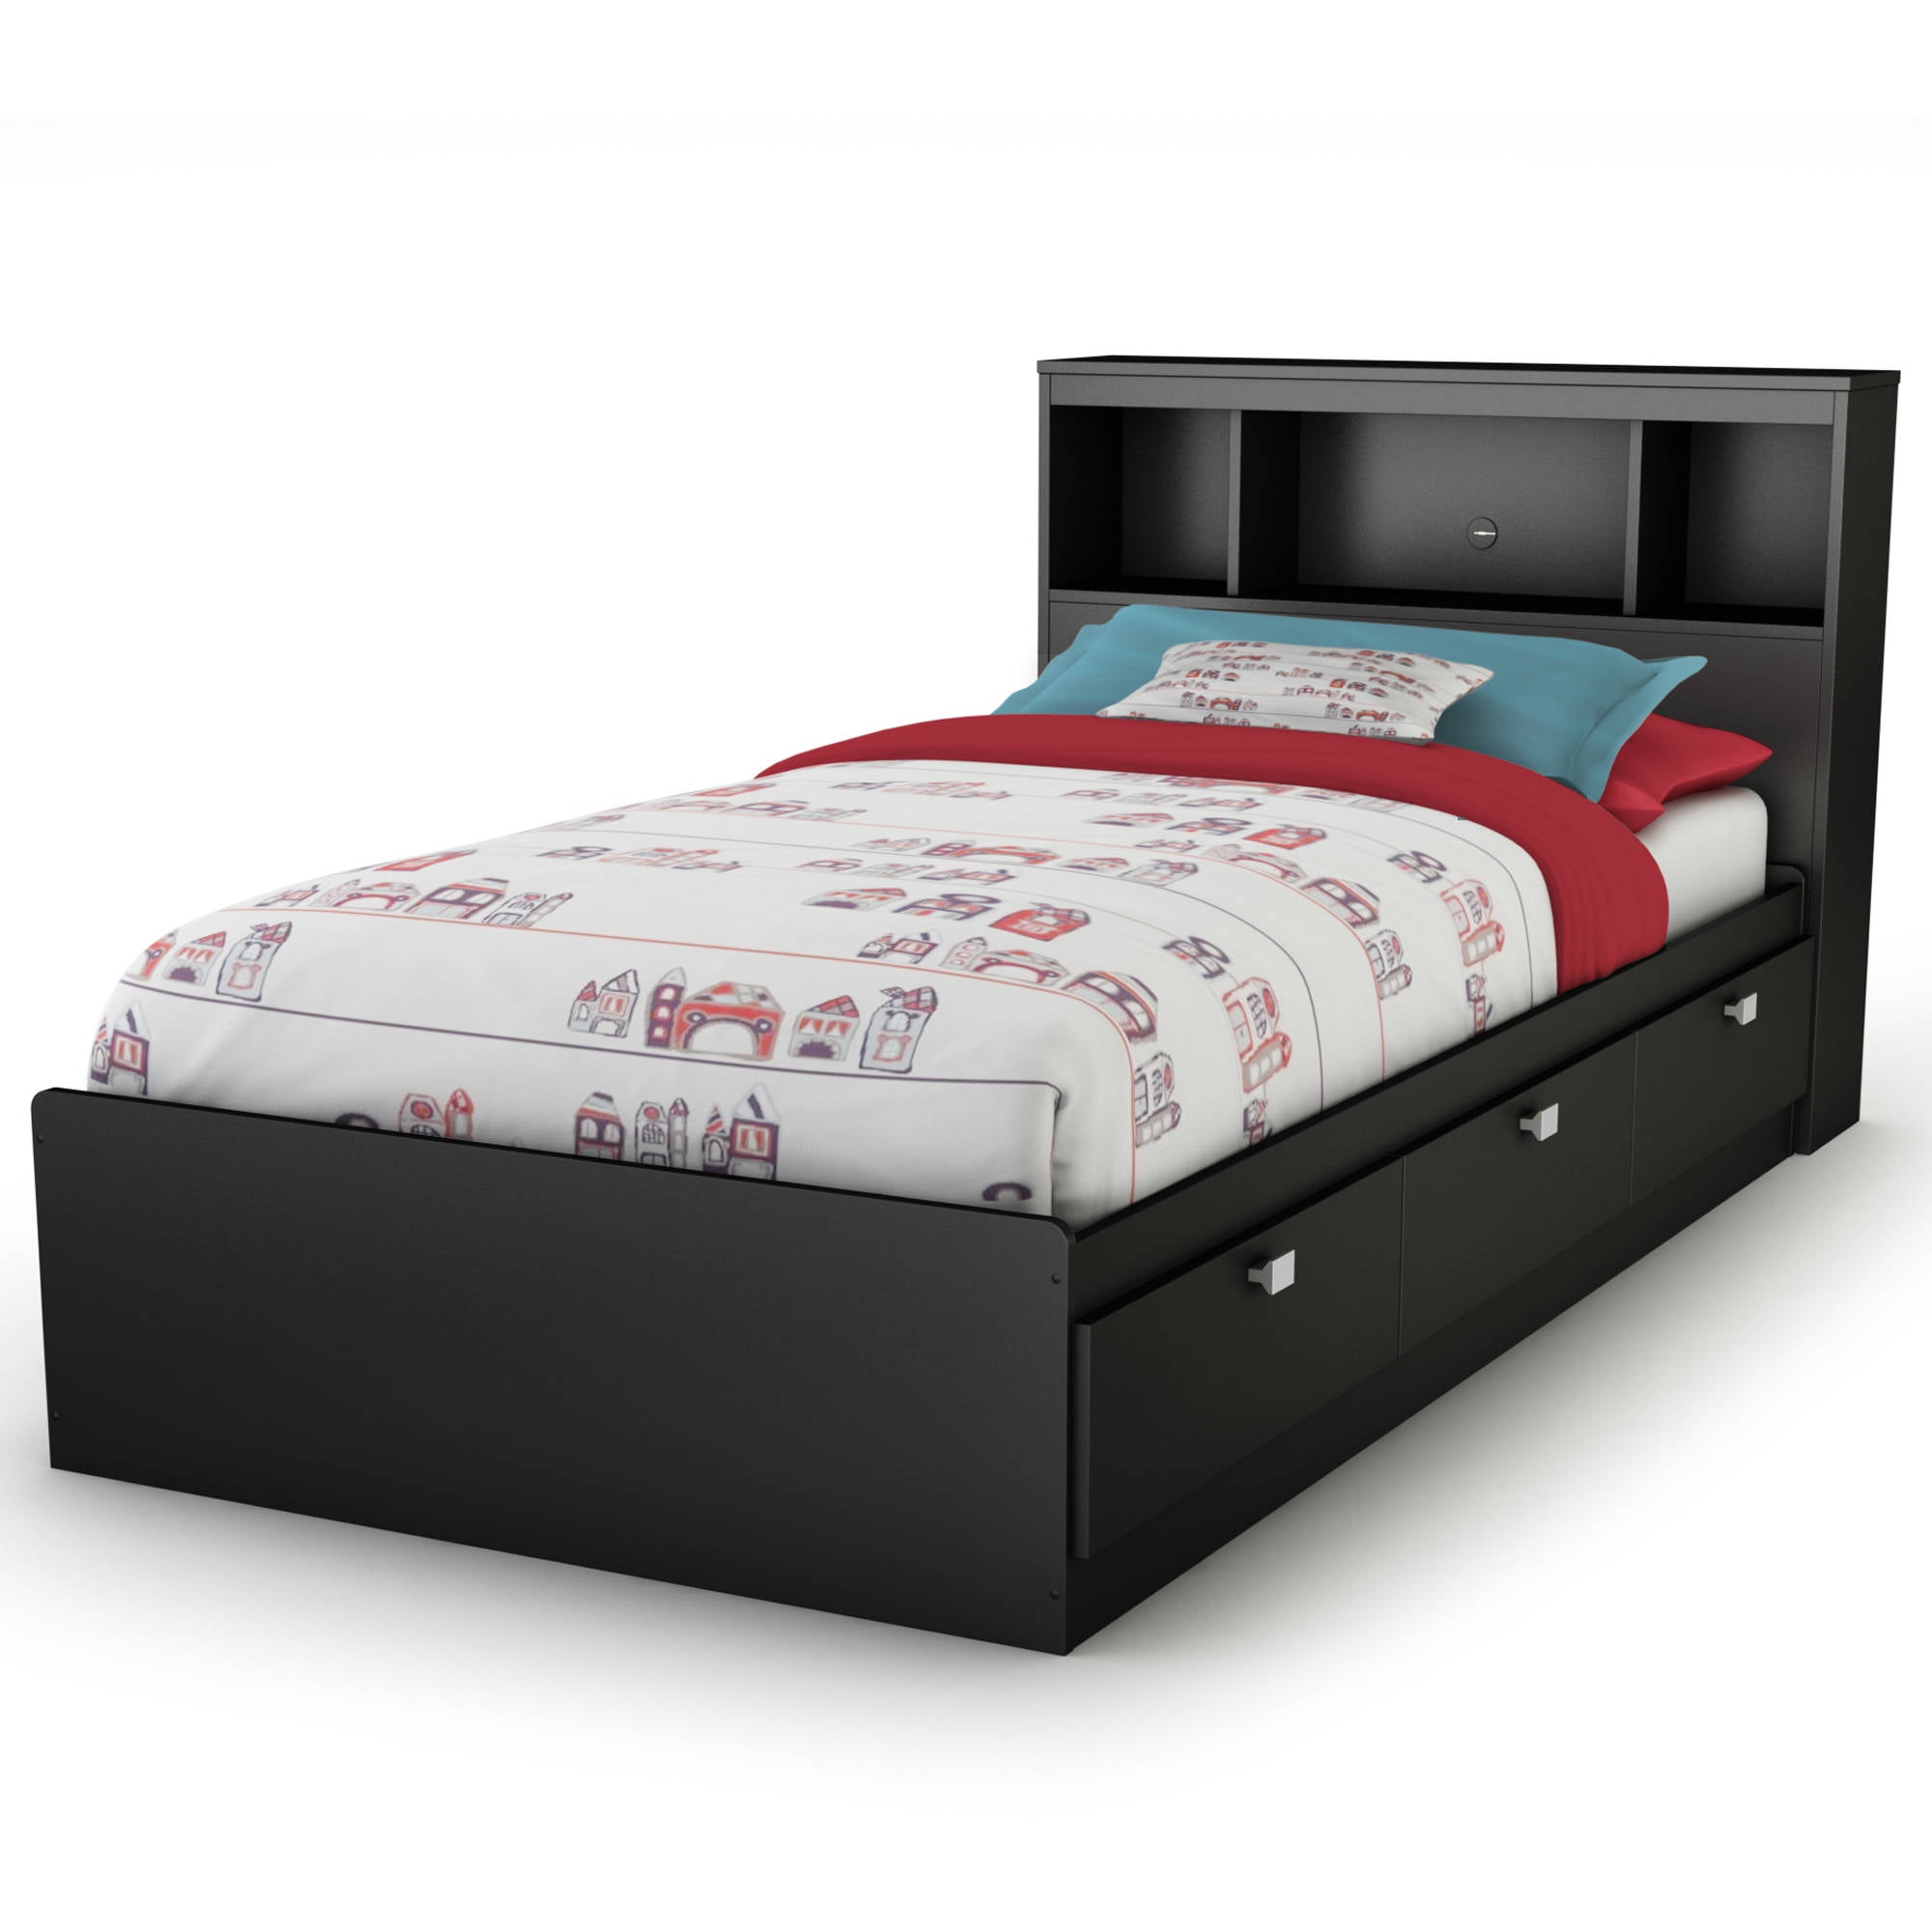 South S Spark 3 Drawer Storage Bed, King Bed Frame With Storage And Headboard